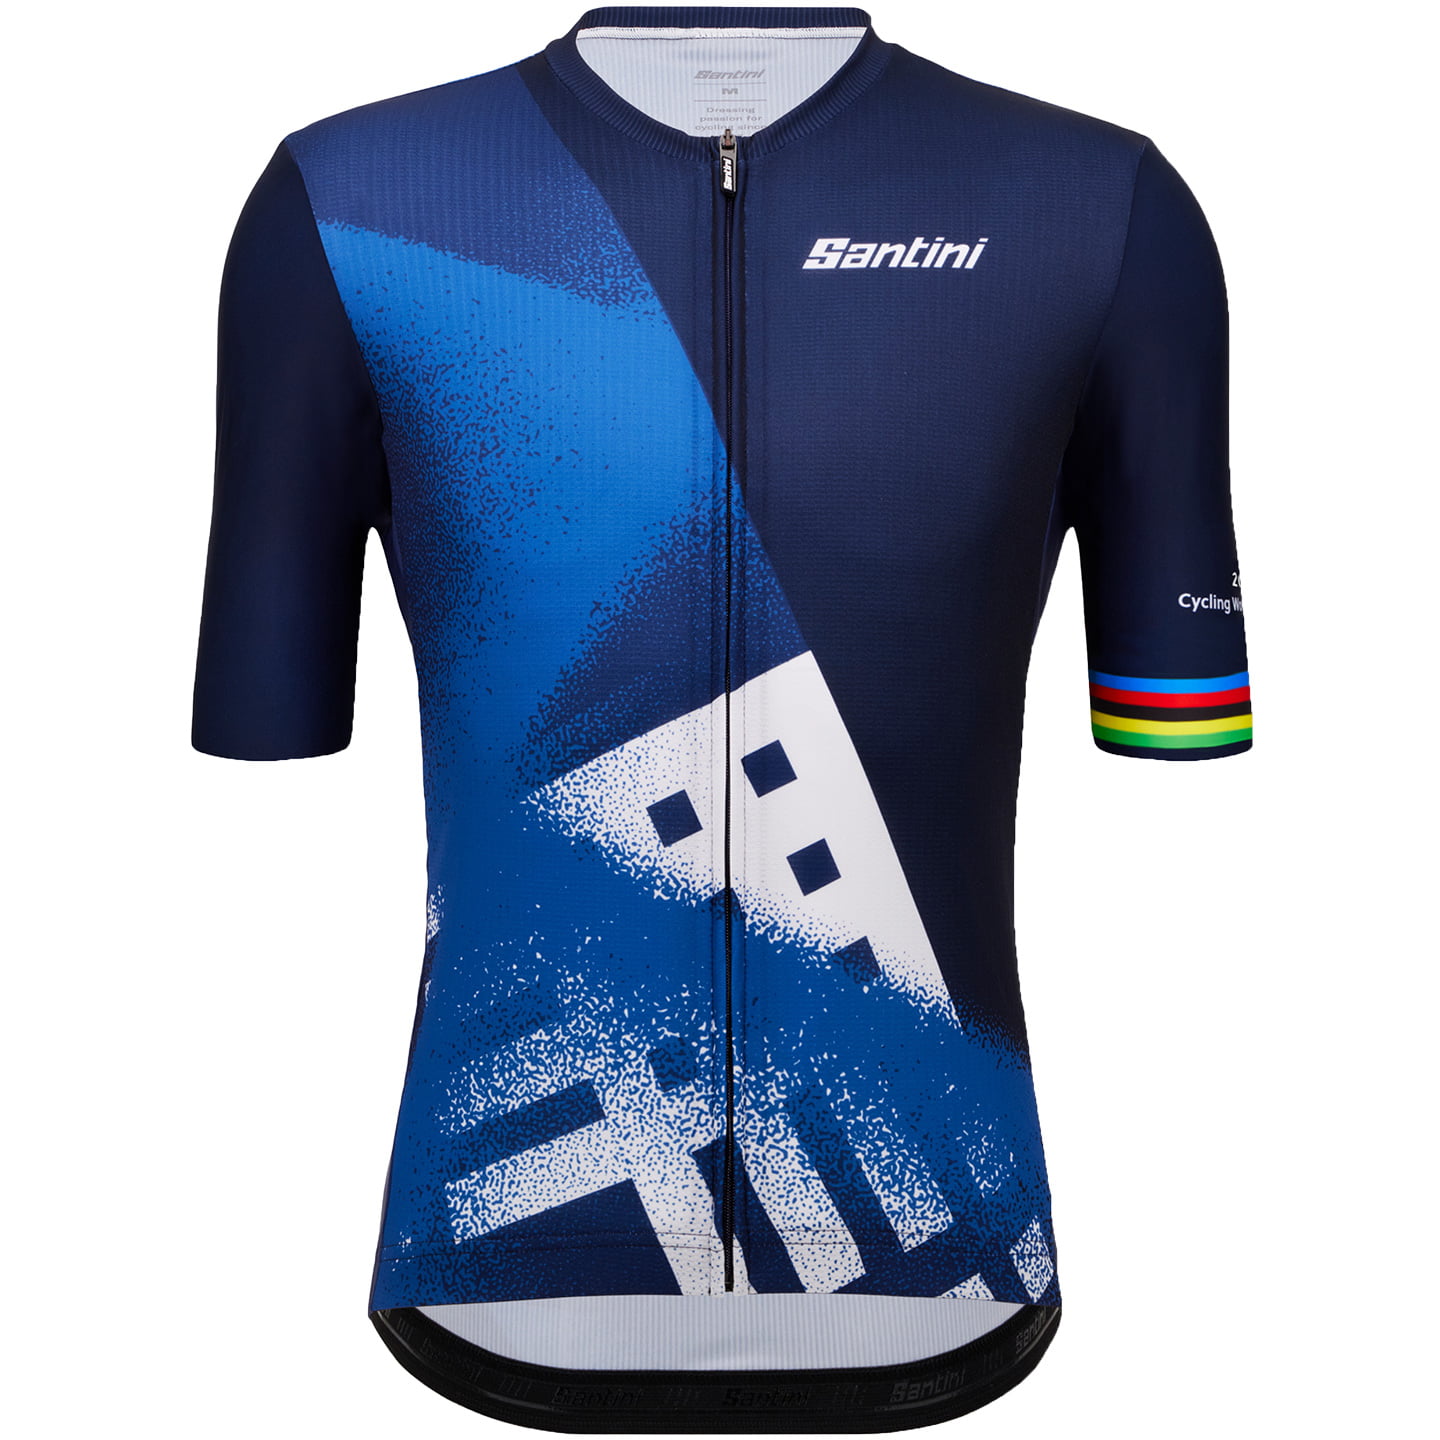 UCI WORLD CHAMPIONSHIP GLASGOW City Grid 2023 Short Sleeve Jersey, for men, size L, Cycling shirt, Cycle clothing